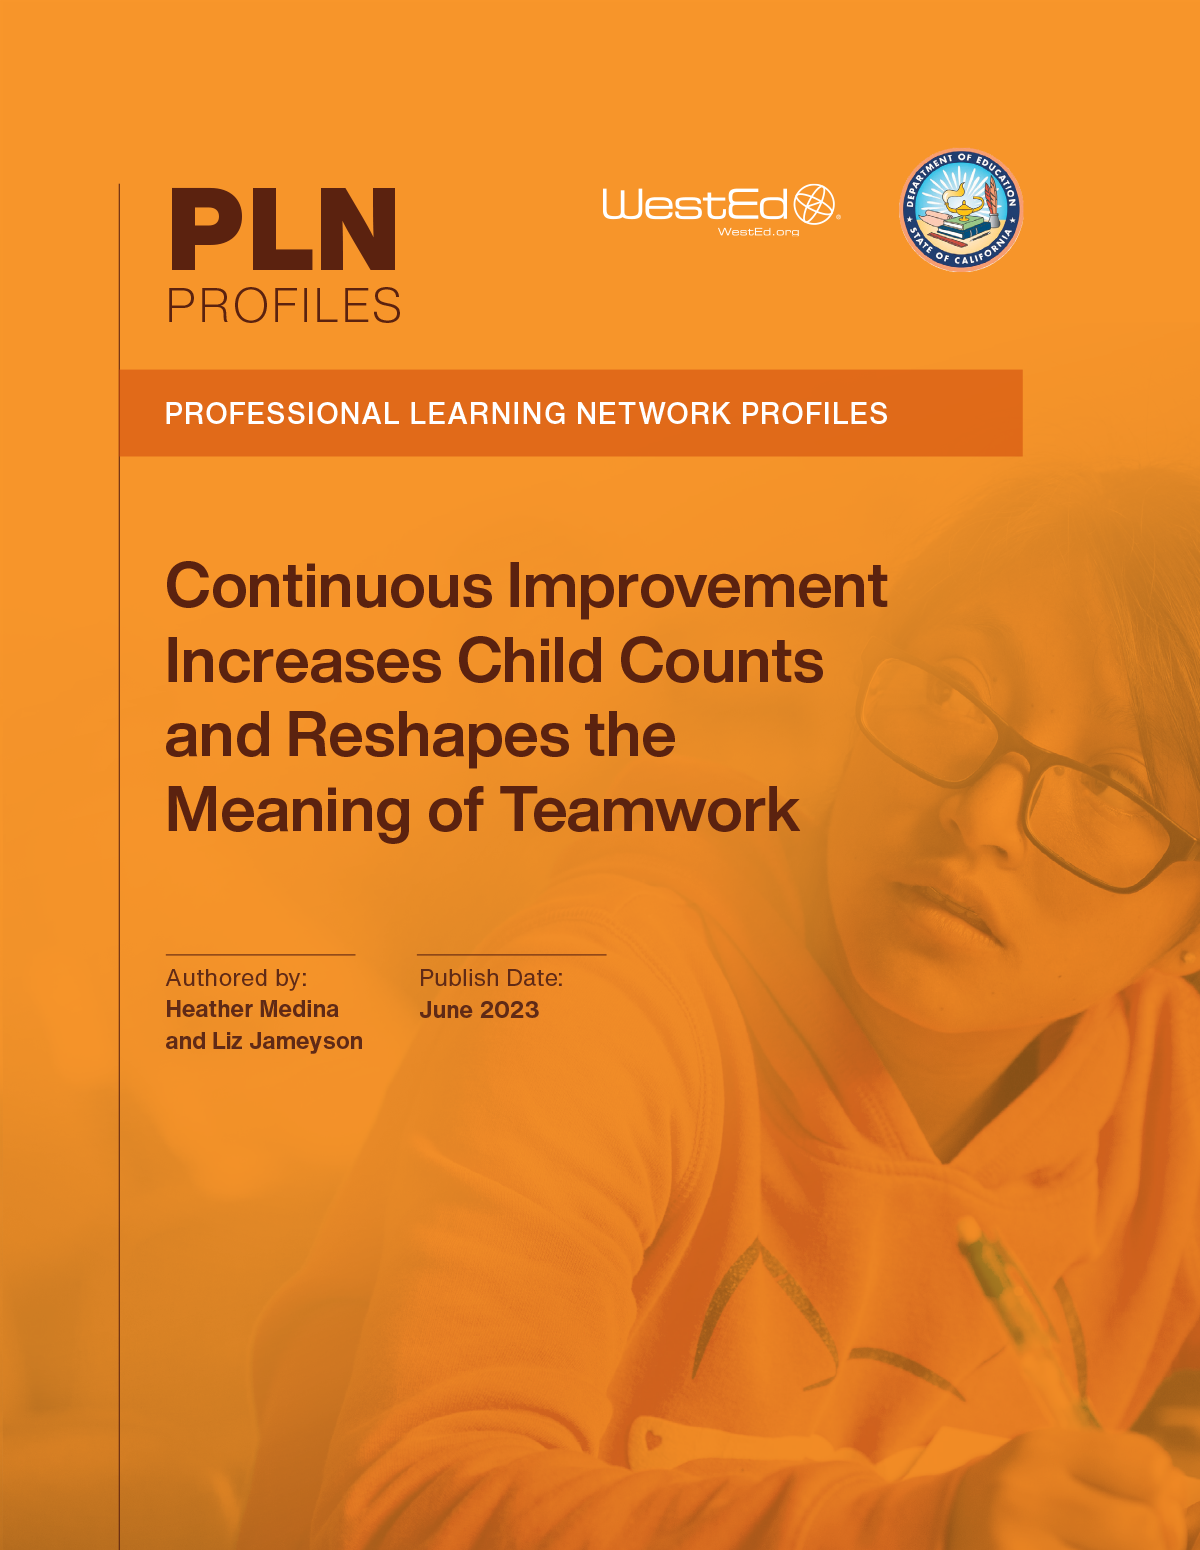 Continuous Improvement Increases Child Counts and Reshapes the Meaning of Teamwork